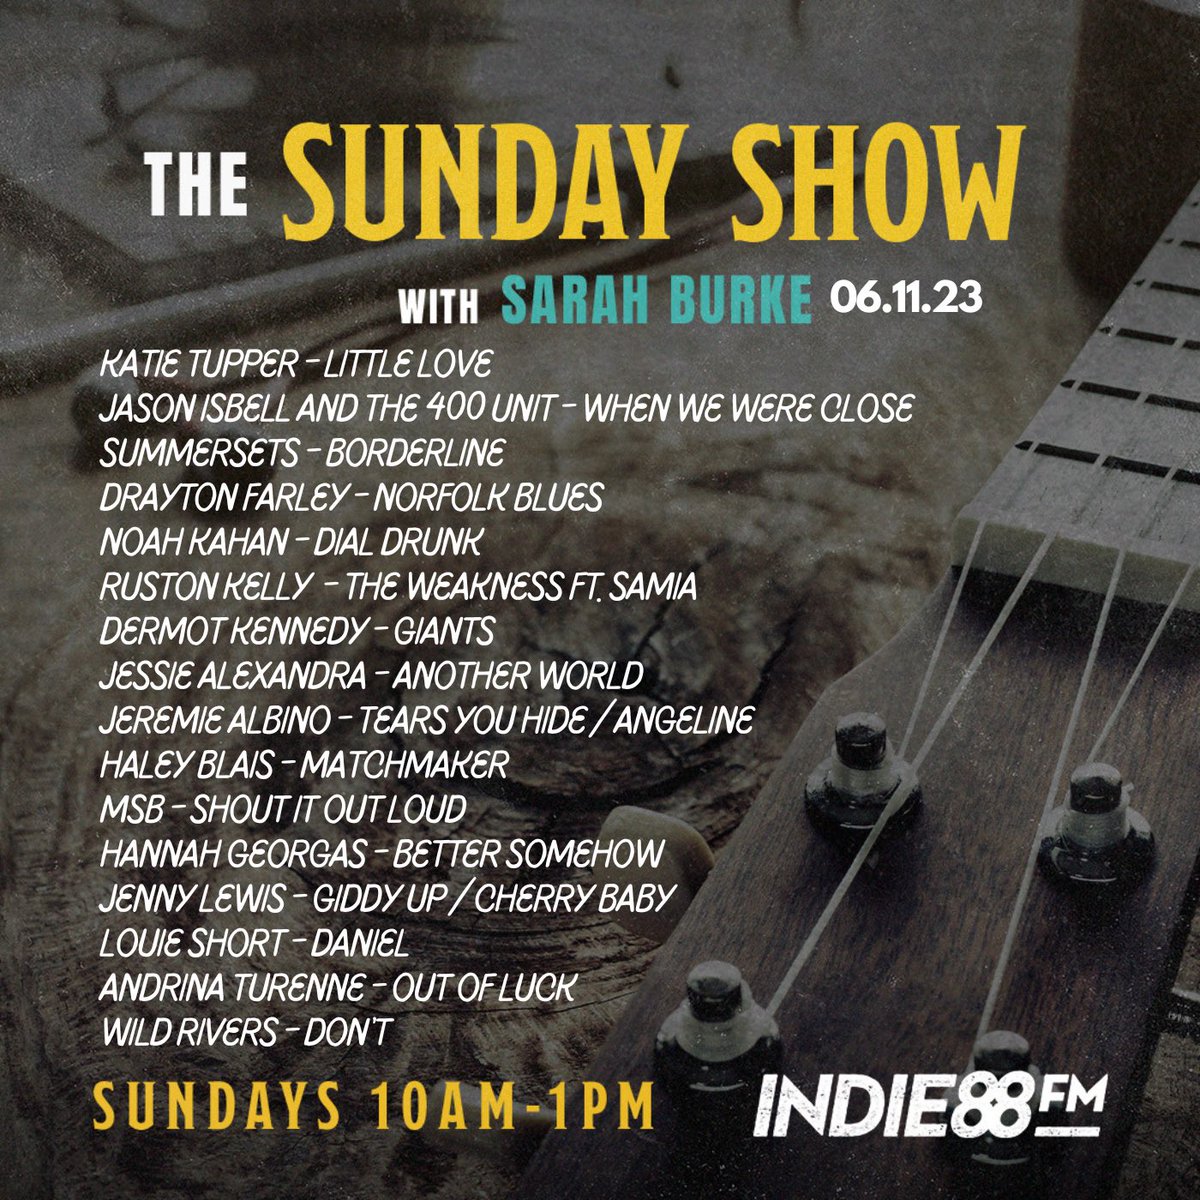 On the Sunday Show @Indie88Toronto today: celebrating new albums from @jennylewis @JasonIsbell and the 400 Unit and special guest @jeremiealbino on his new album Tears You Hide, listen on 88.1 or Indie88.com.